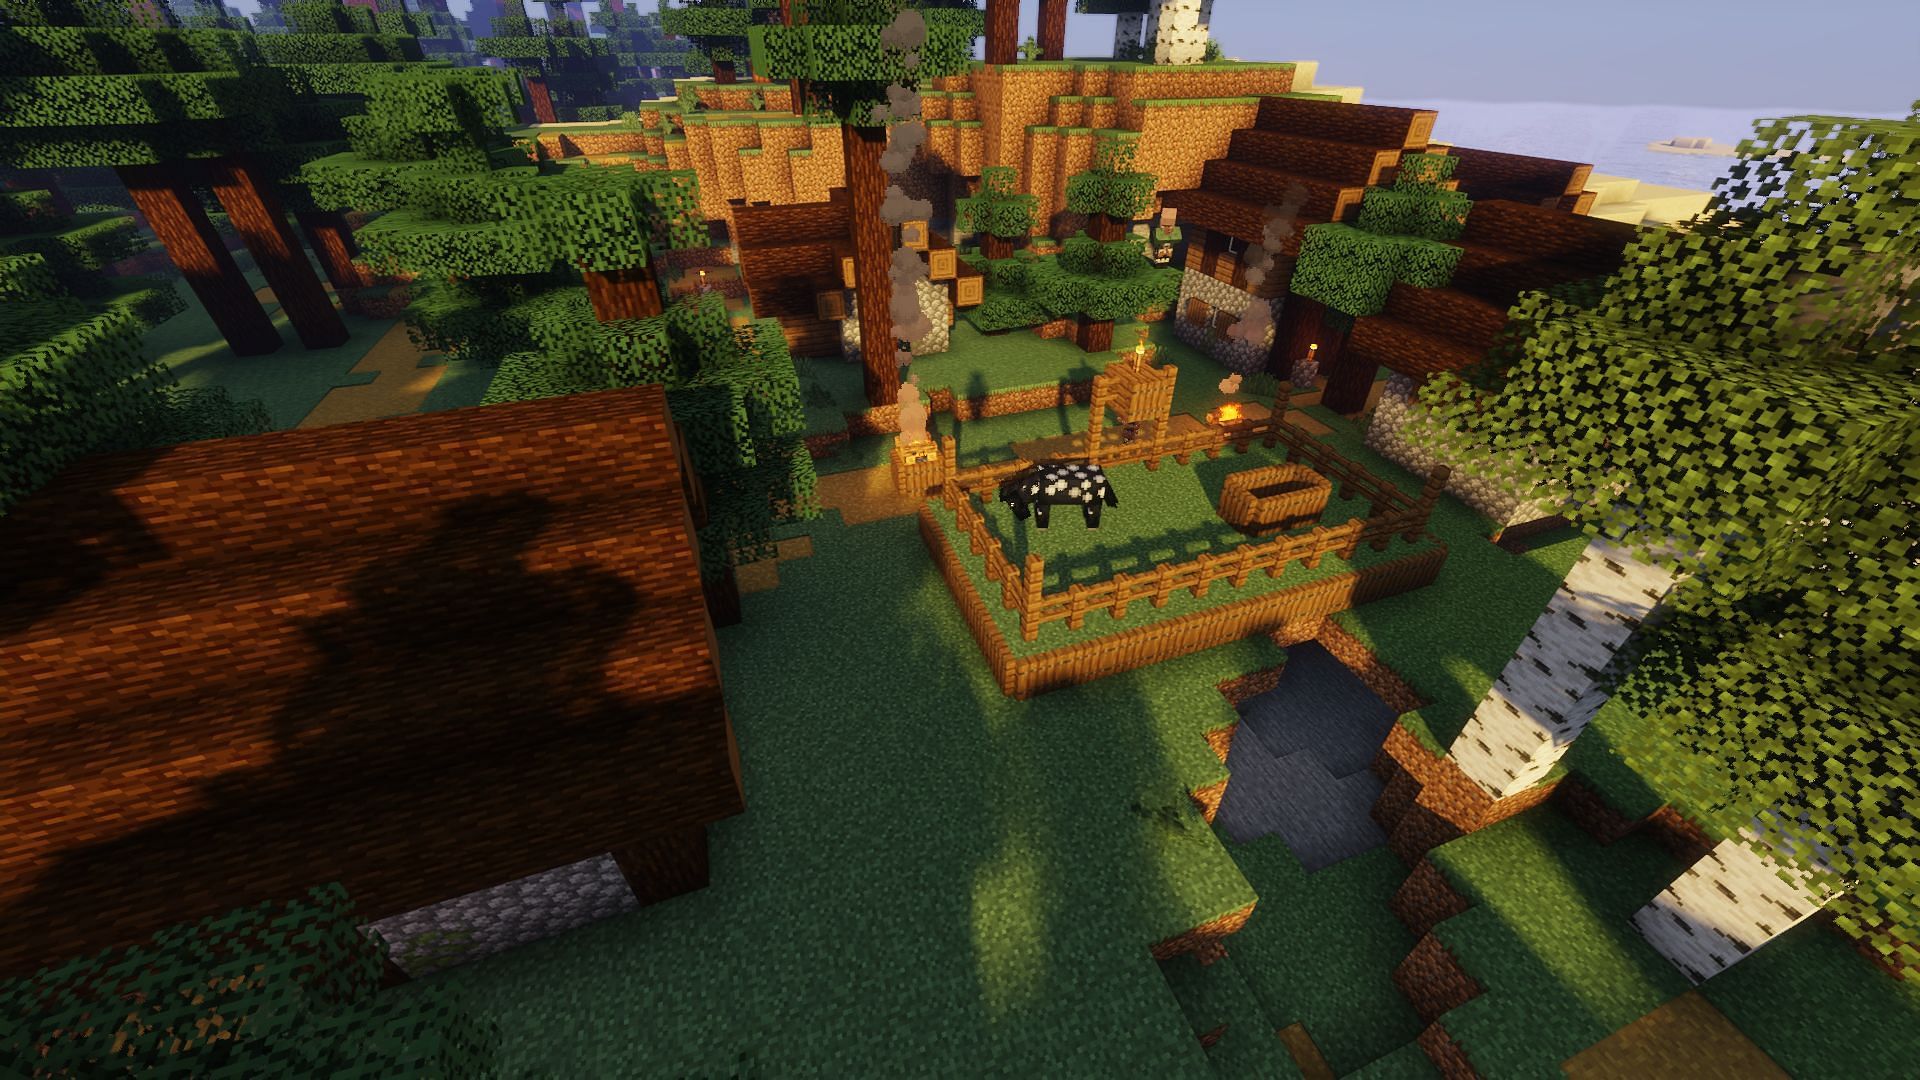 The village that players spawn in (Image via Minecraft)